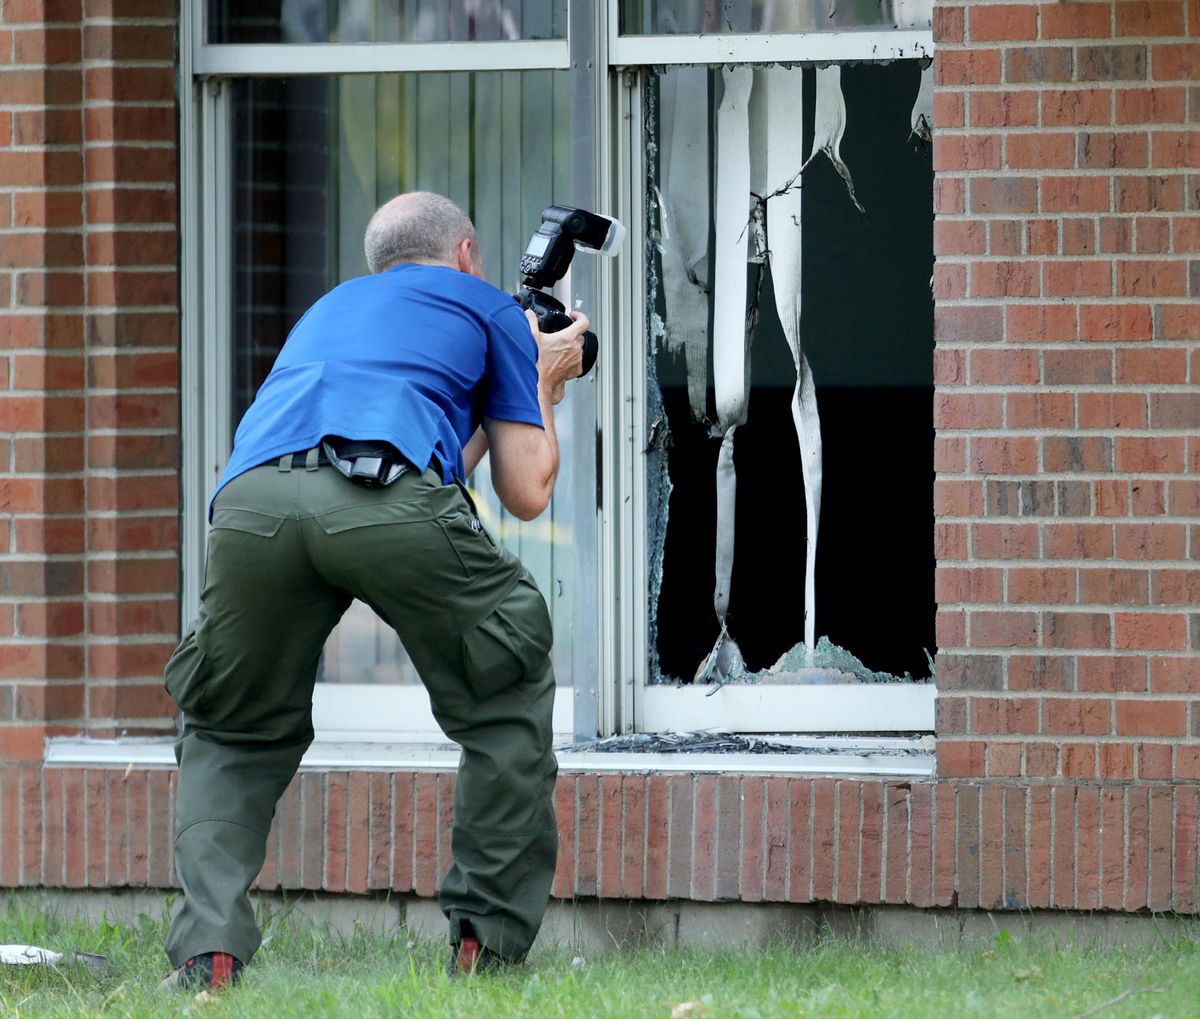 A law enforcement official photographs the scene of an early morning explosion Saturday, Aug. 5, 2017, at the Dar Al-Farooq Islamic Center in Bloomington, Minn. (David Joles / Tribune News Service)